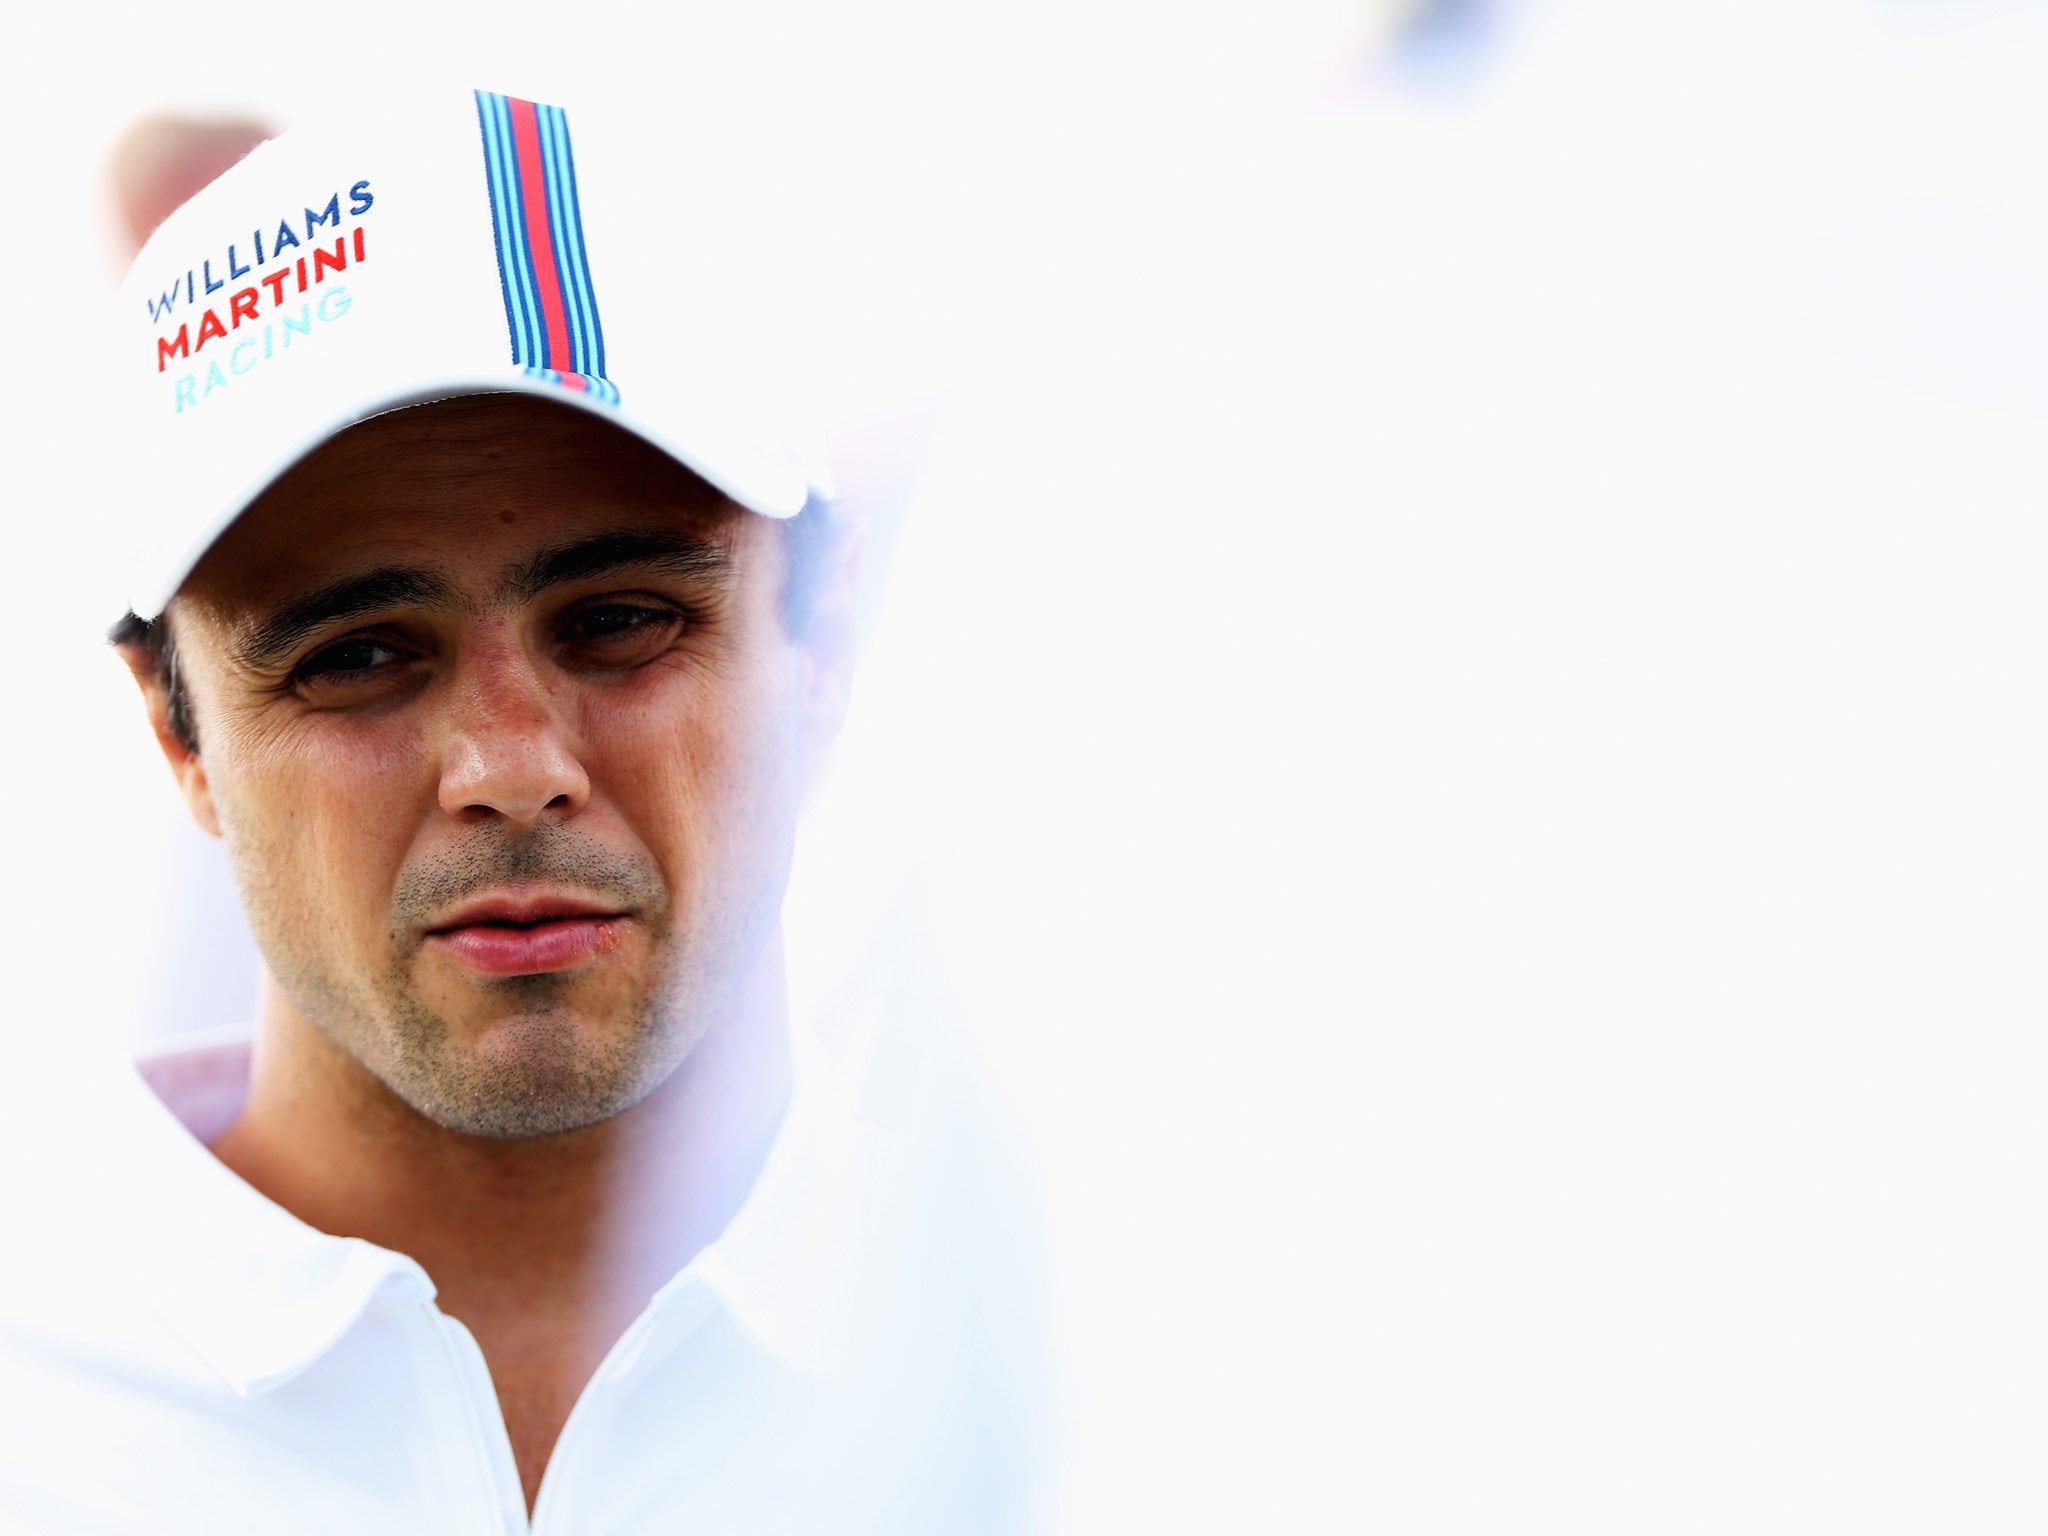 Felipe Massa, who is now driving for Williams, pictured before the Australian Grand Prix